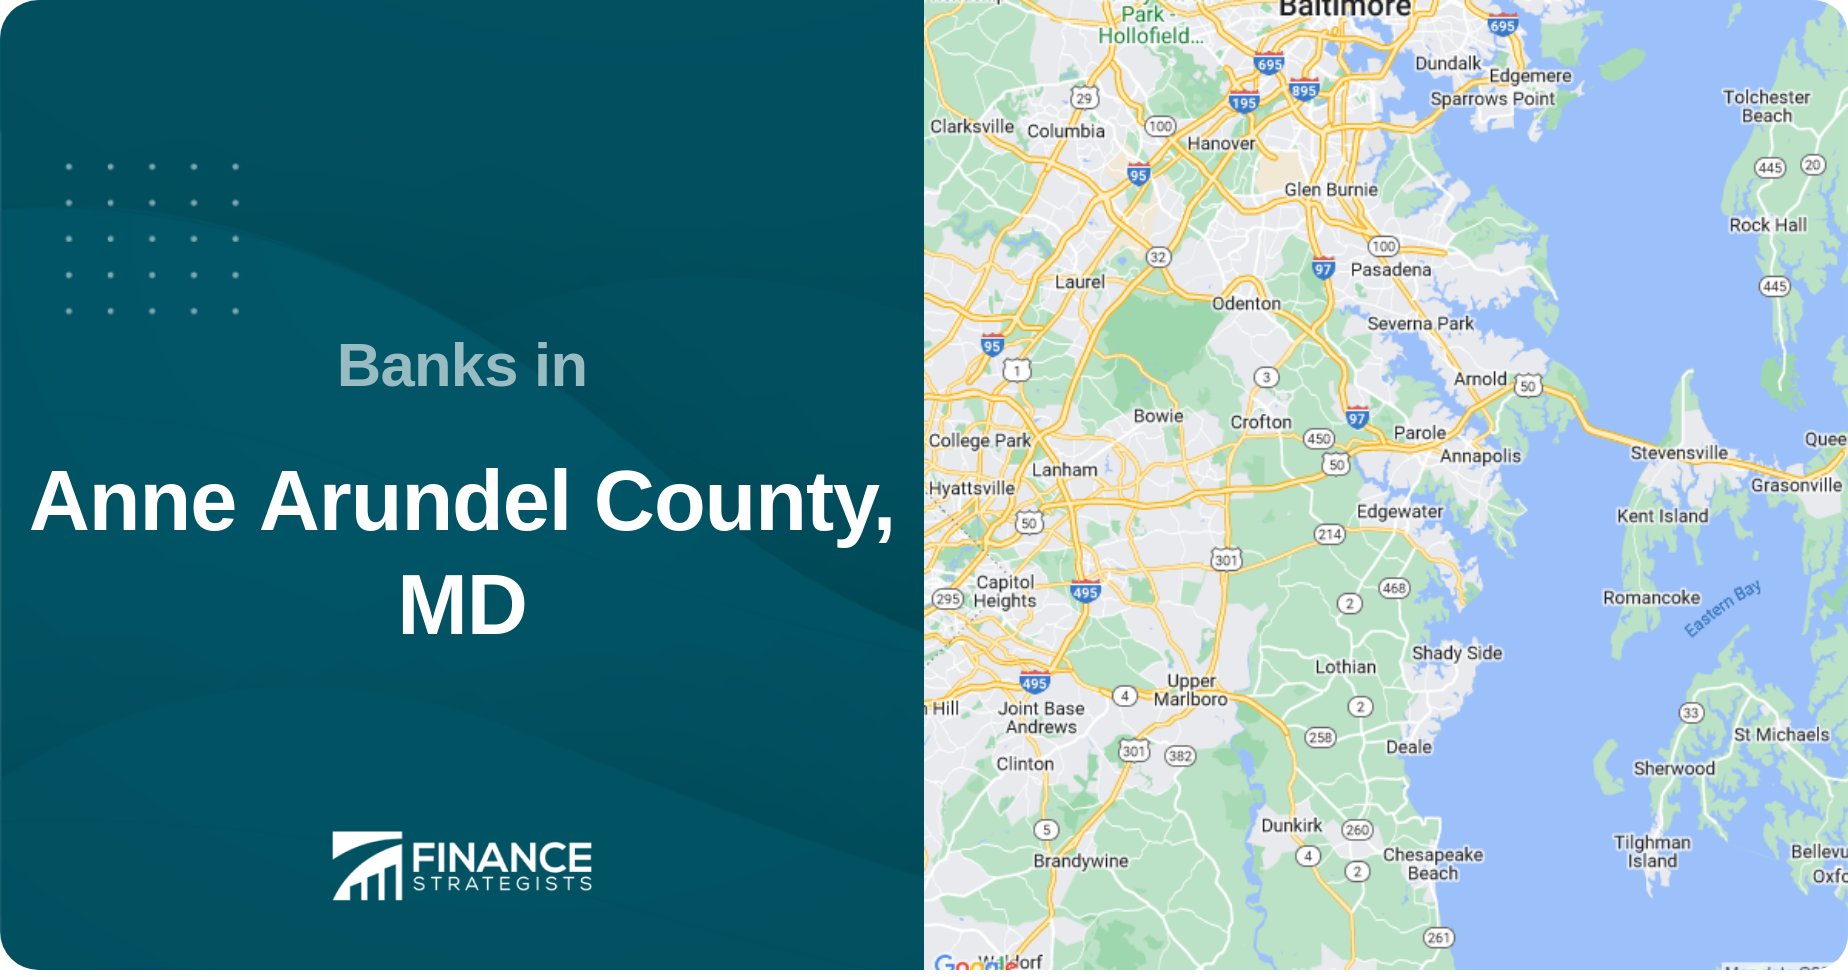 Banks in Anne Arundel County, MD